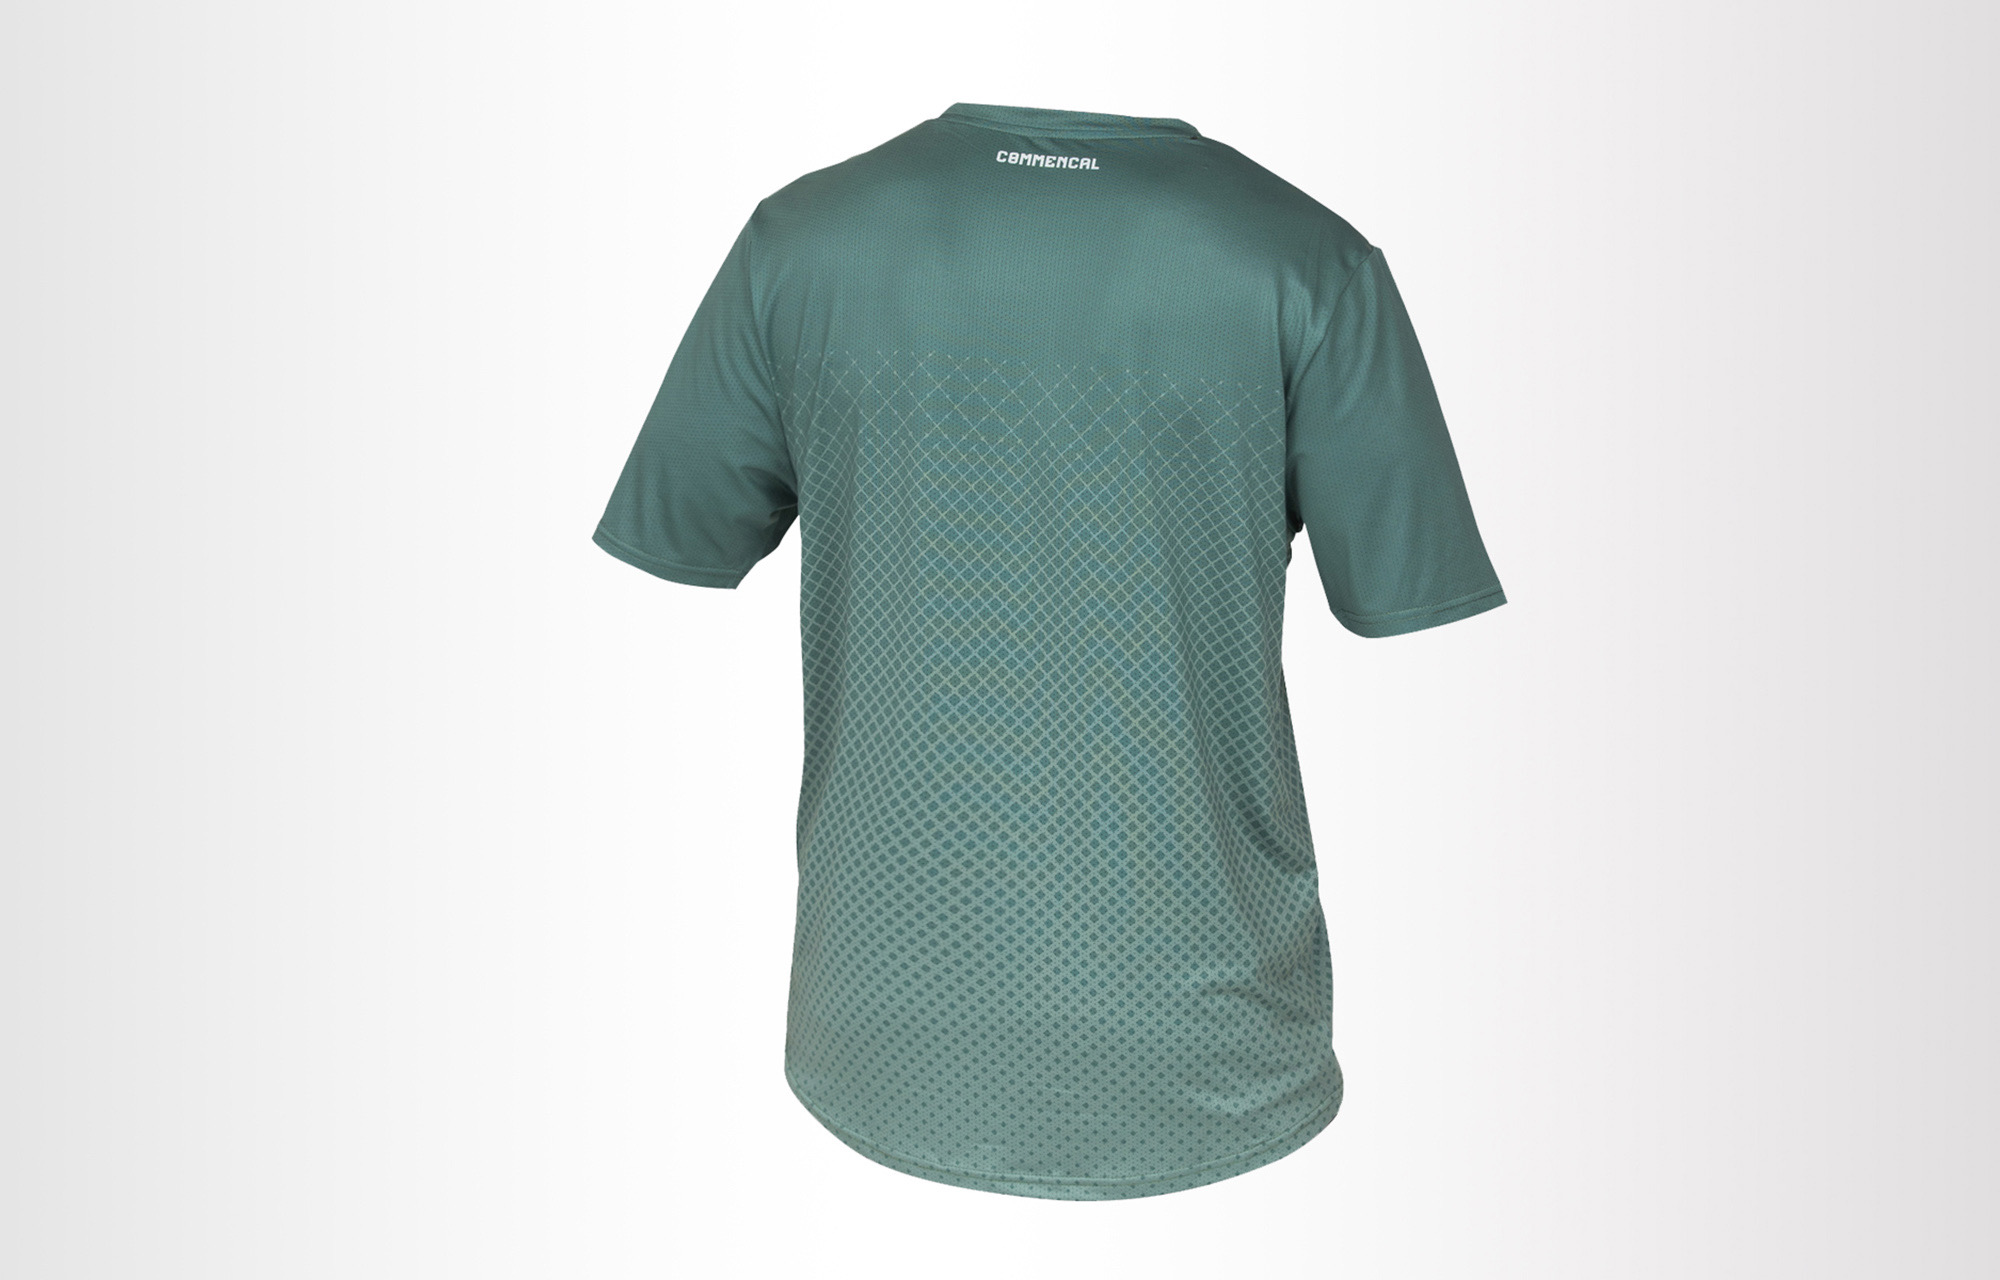 JERSEY MANGAS CORTAS COMMENCAL GREEN image number 0